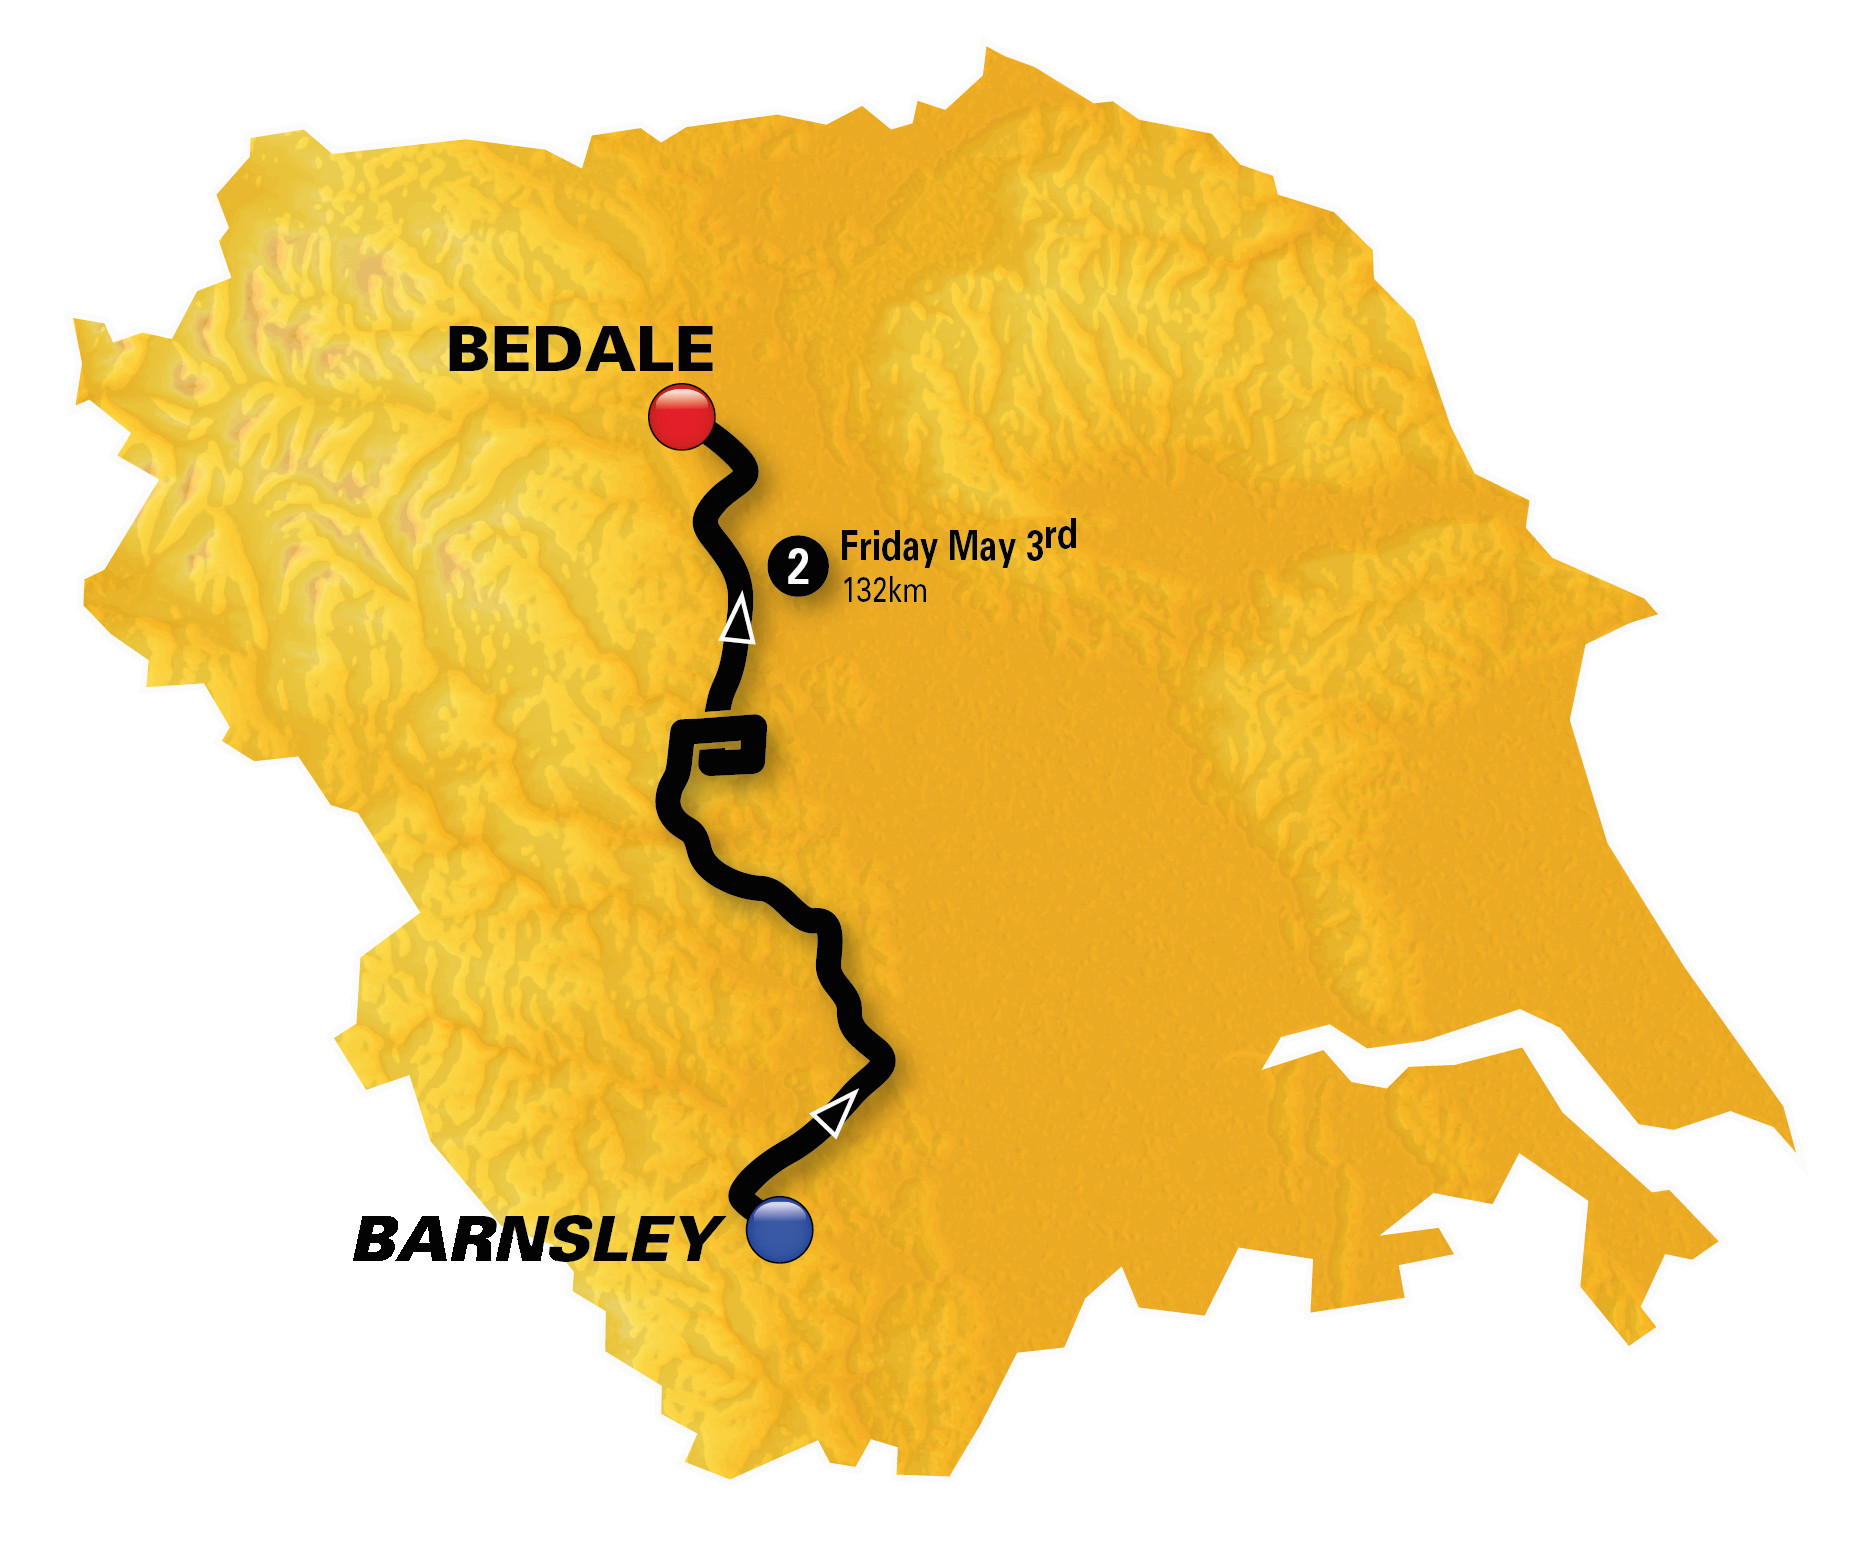 stage 2 barnsley to bedale 132km tour de yorkshire 2